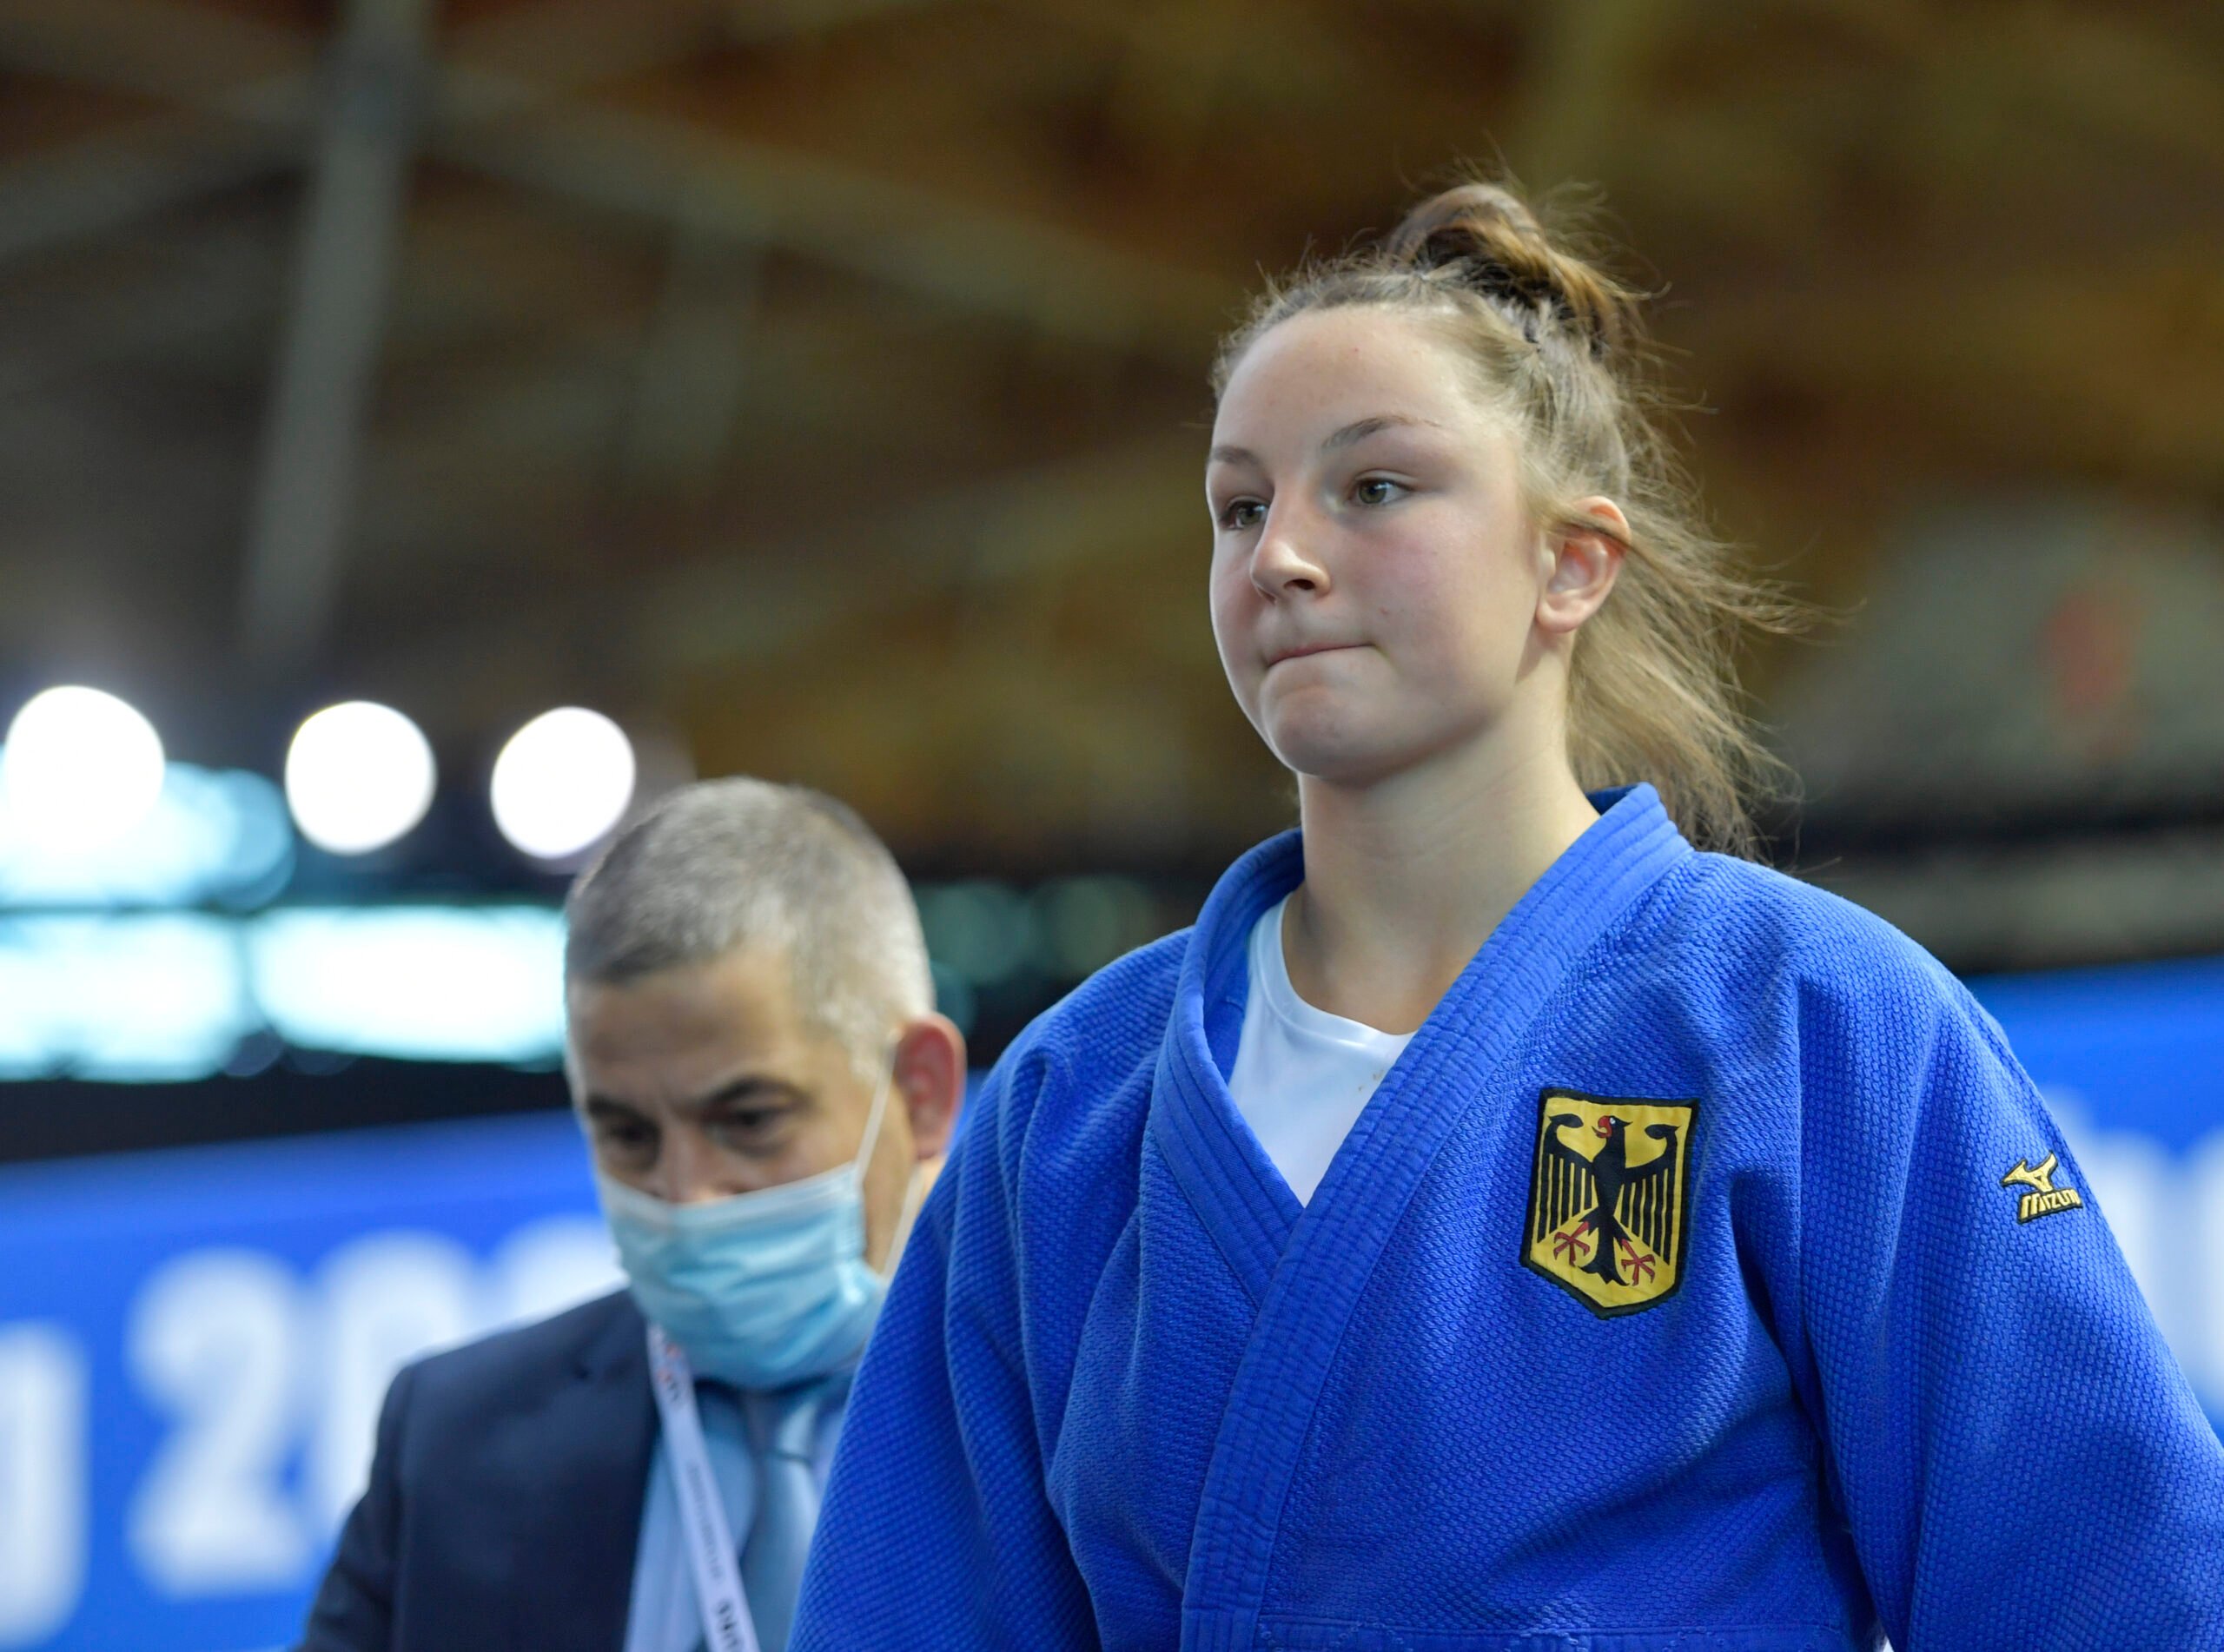 AMBITIOUS OLEK TAKES JUNIOR TITLE AND LOOKS TO SURPASS FATHERS ACCOMPLISHMENTS